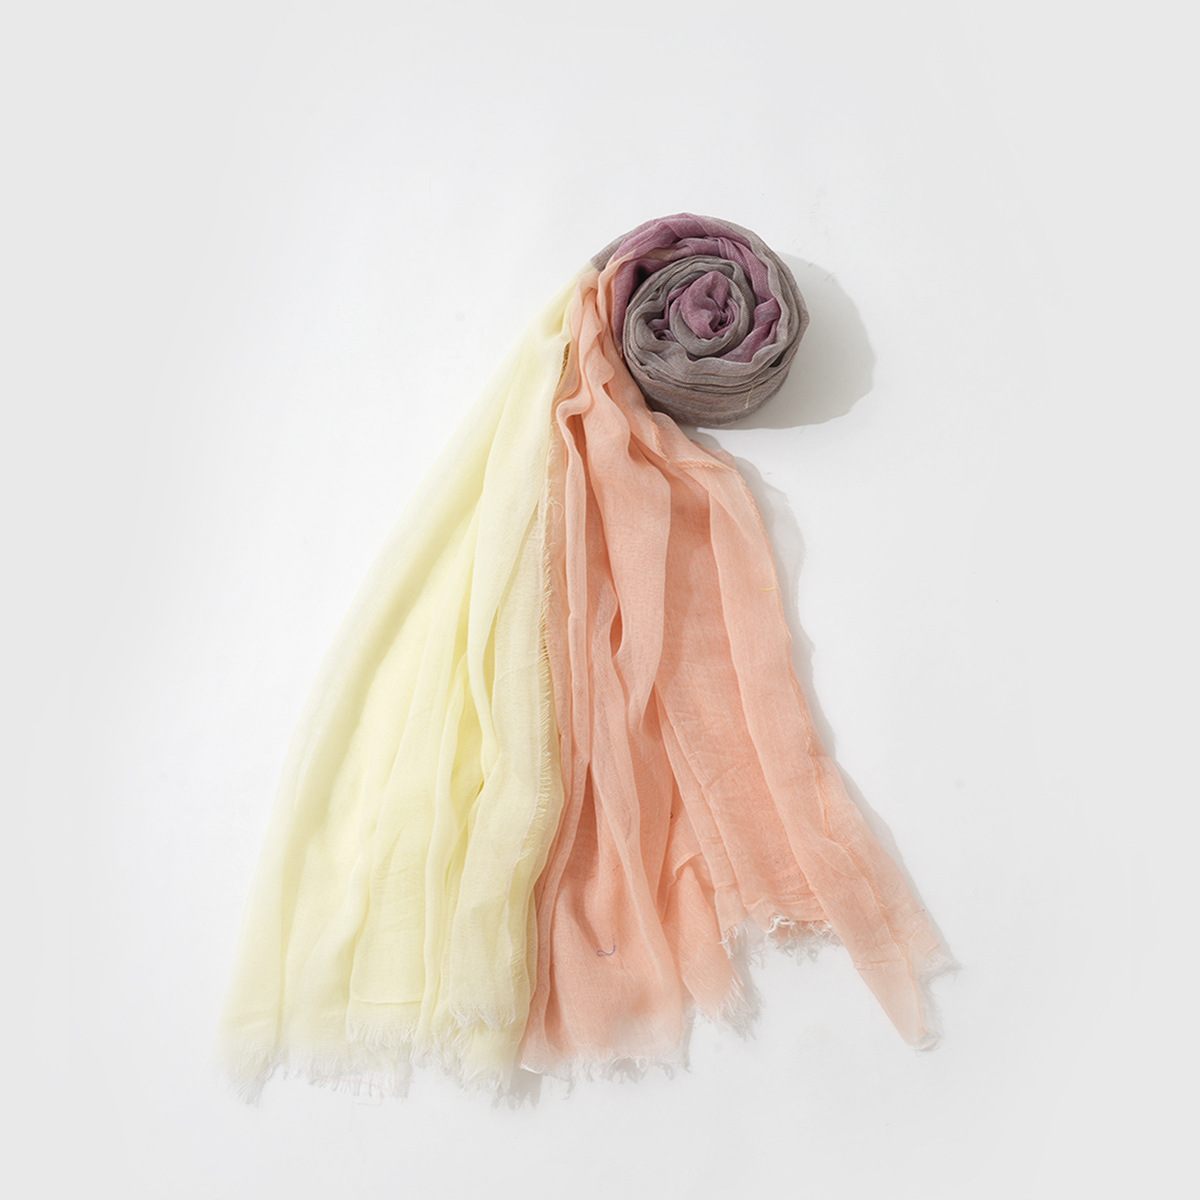 One Piece Dropshipping Best Seller in Europe and America New Spring and Summer Leisure Style Chiffon Gradient Color Scarf Fashion All-Matching Long Shawl